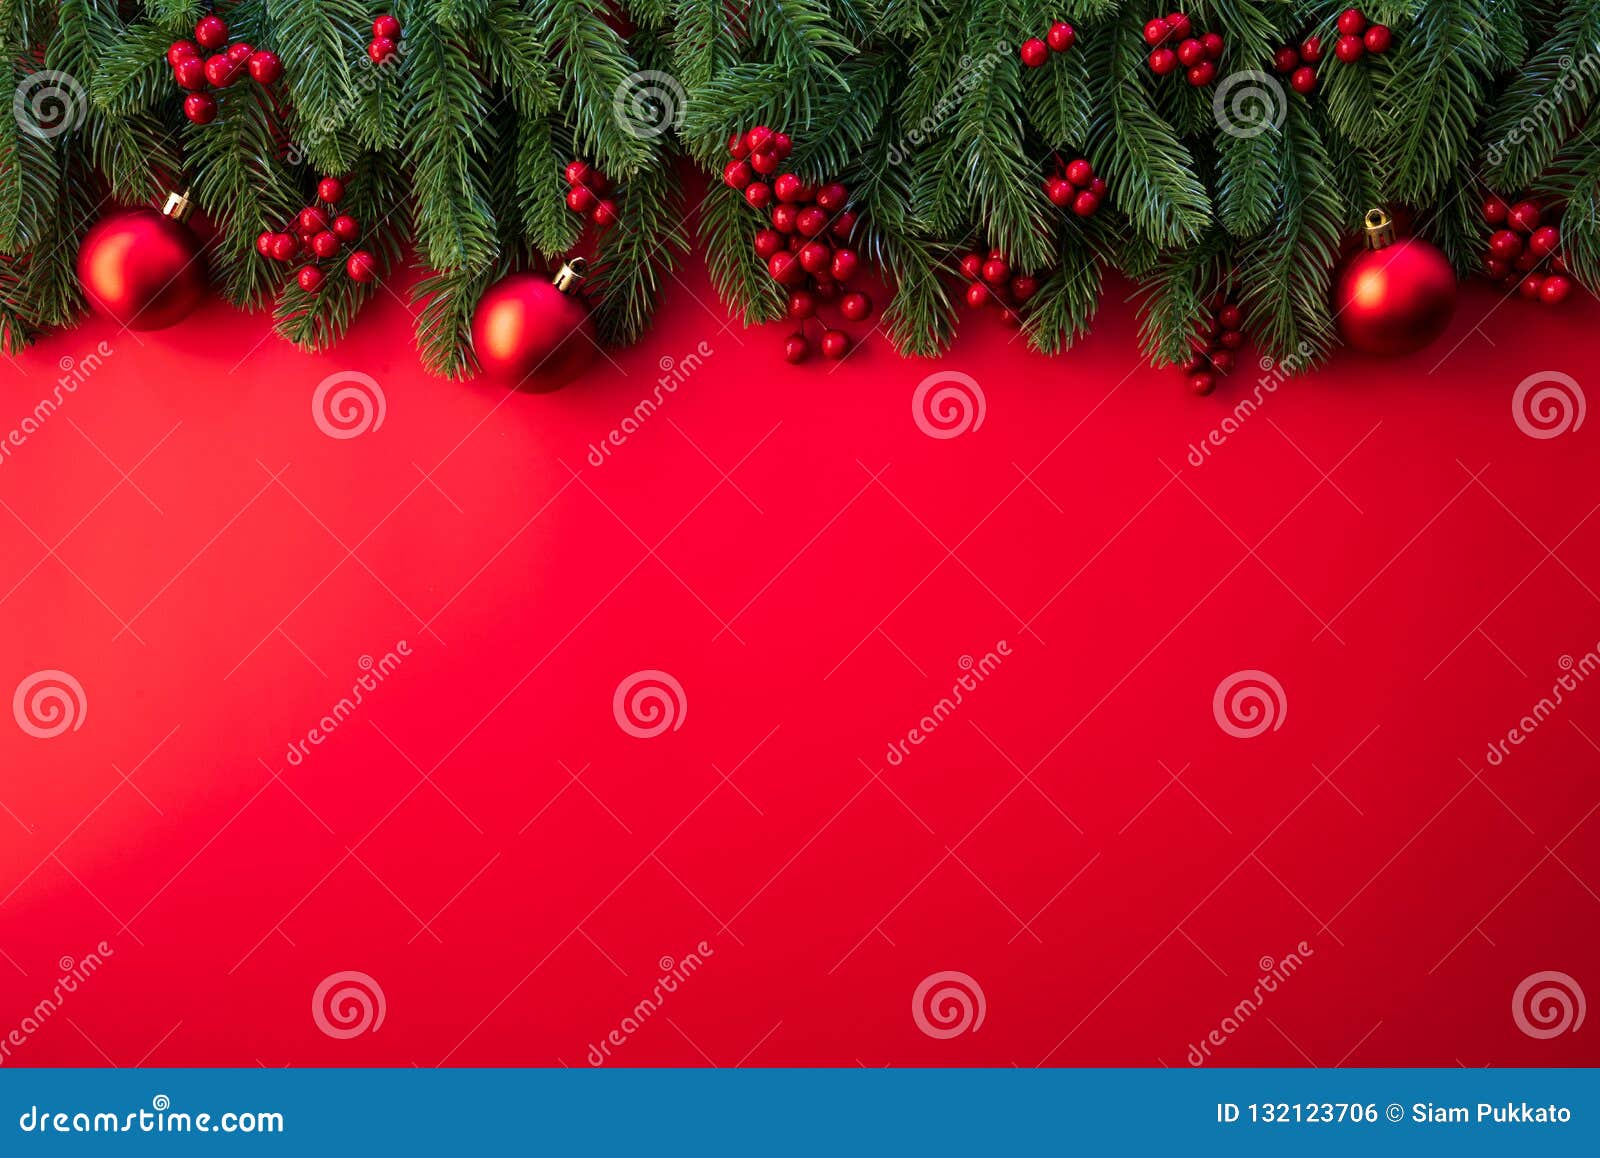 christmas background concept. top view of christmas with spruce branches, pine cones, red berries